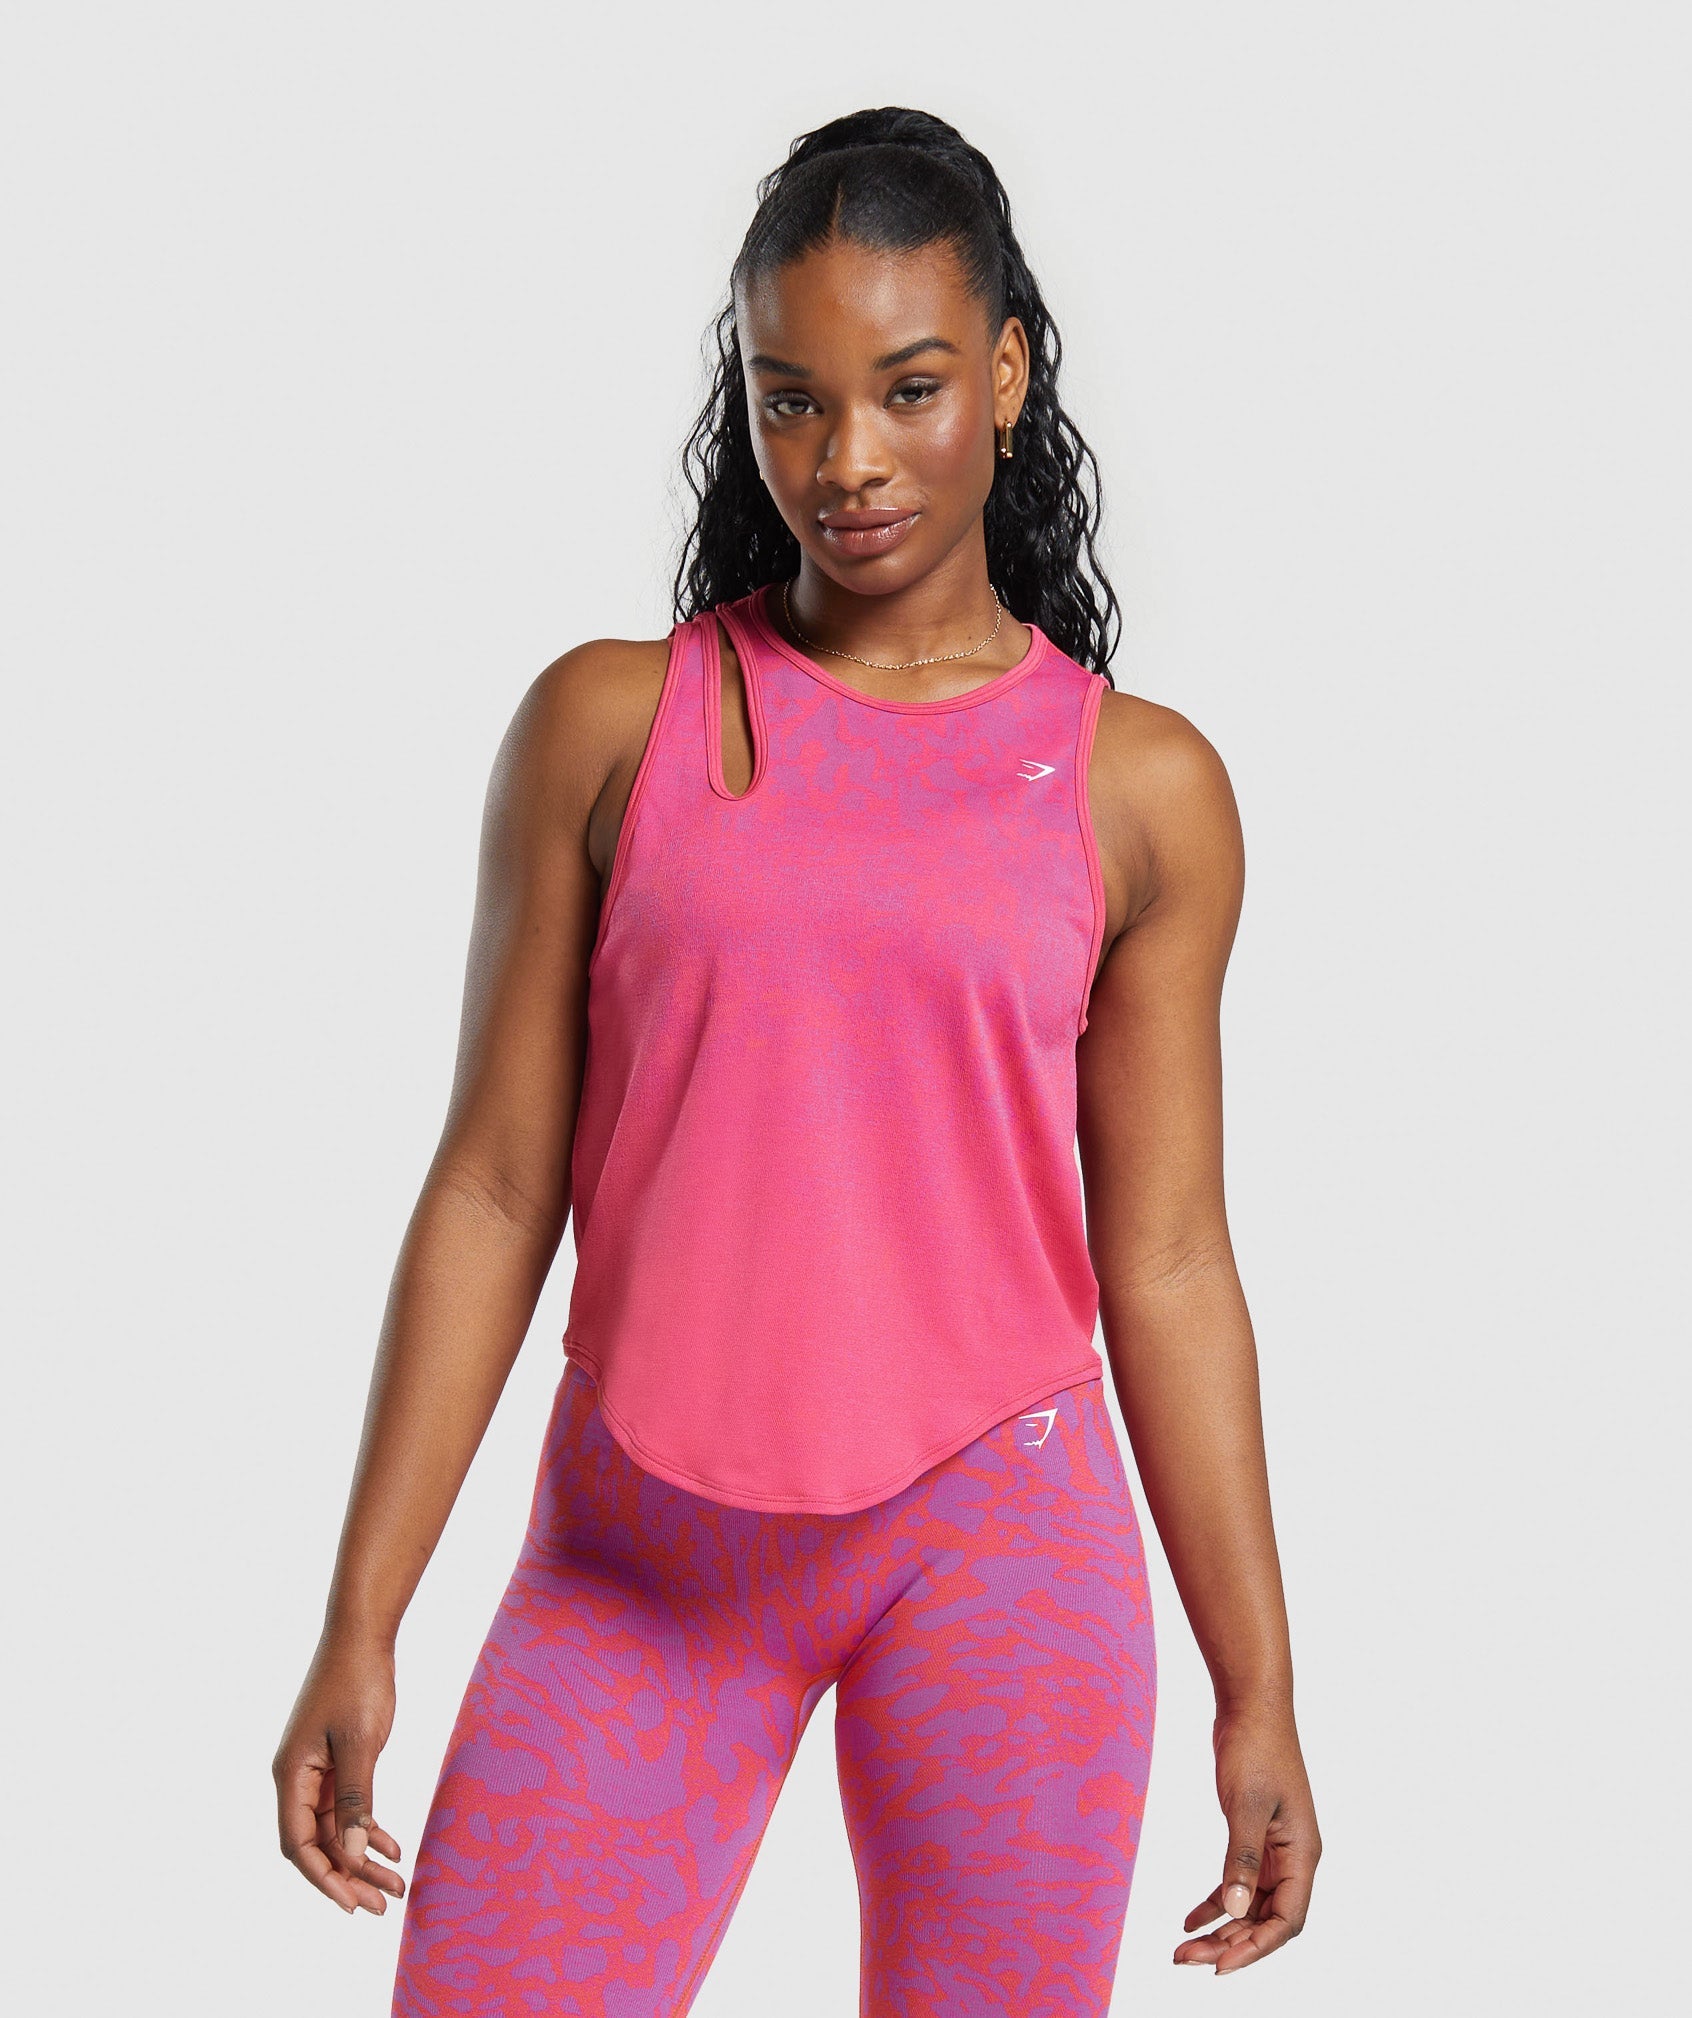 Adapt Safari Seamless Drop Arm Faded Tank dans Shelly Pink/Fly Coral